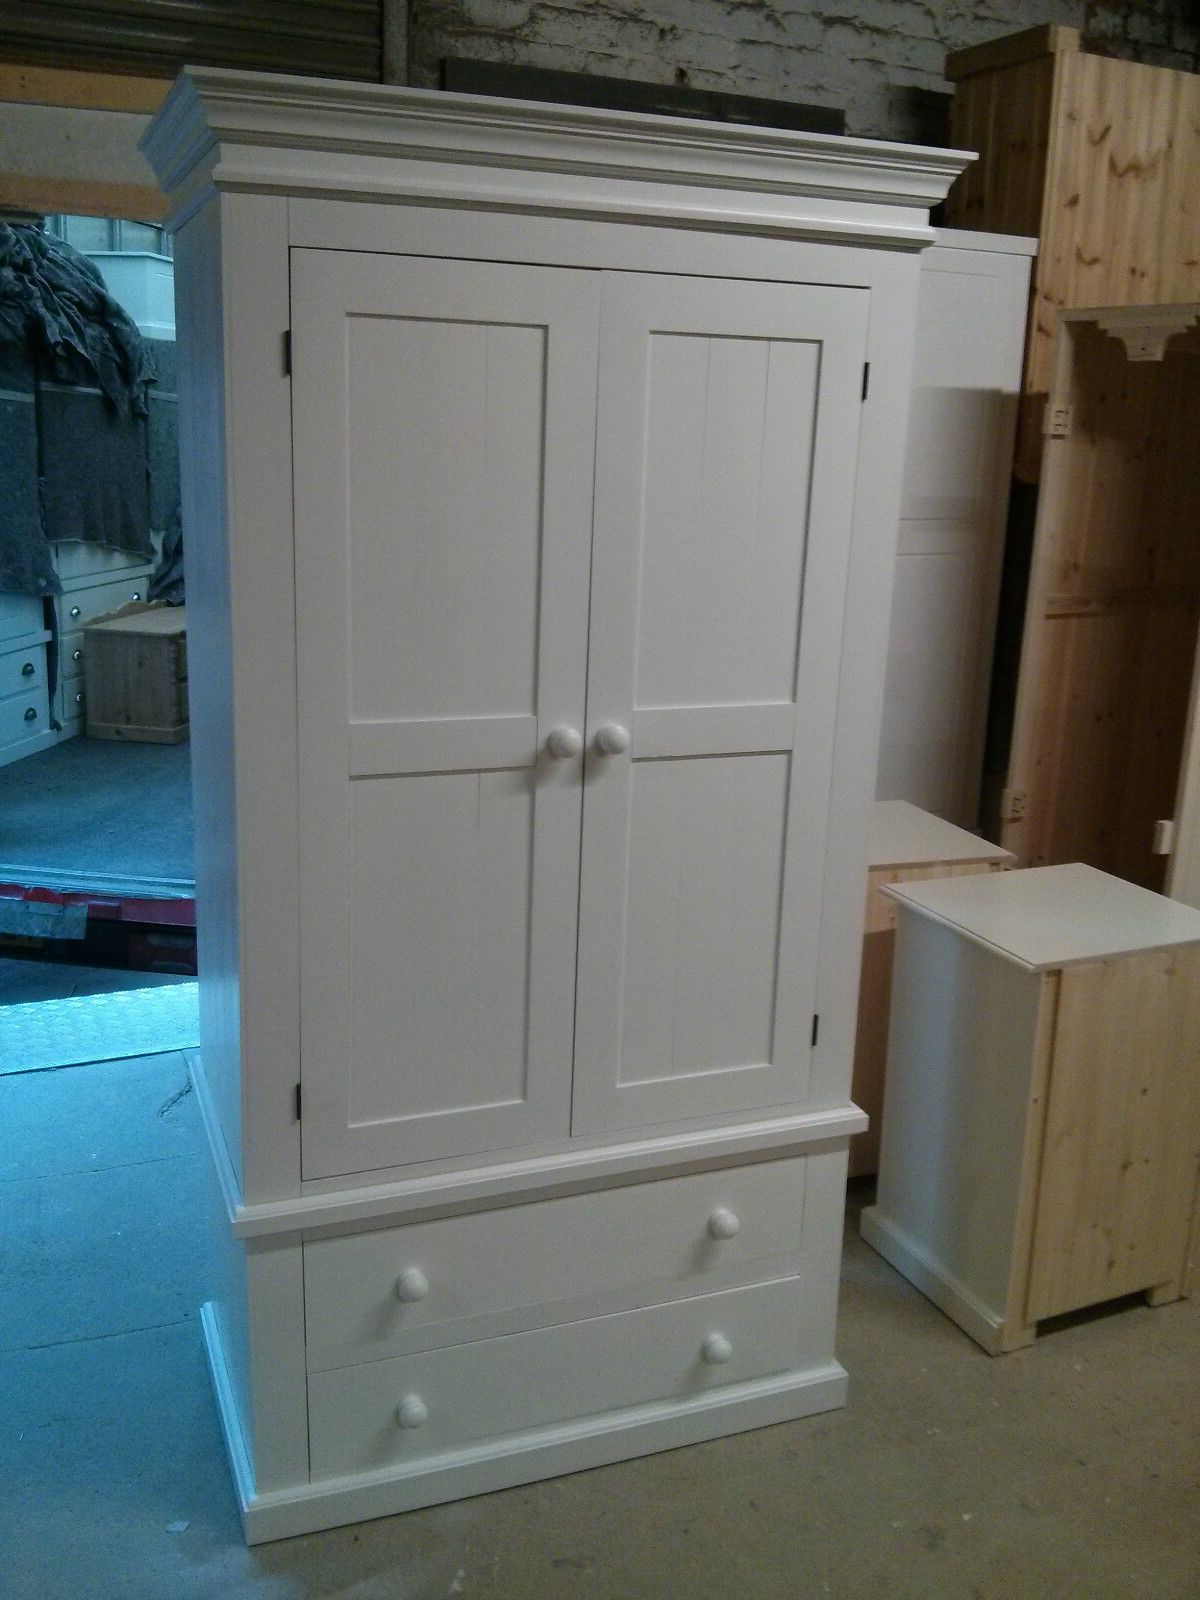 Pine Victorian Gents 2 Drawer Wardrobe Painted White Shabby Chic | Ebay With Regard To Shabby Chic Pine Wardrobes (Gallery 2 of 20)